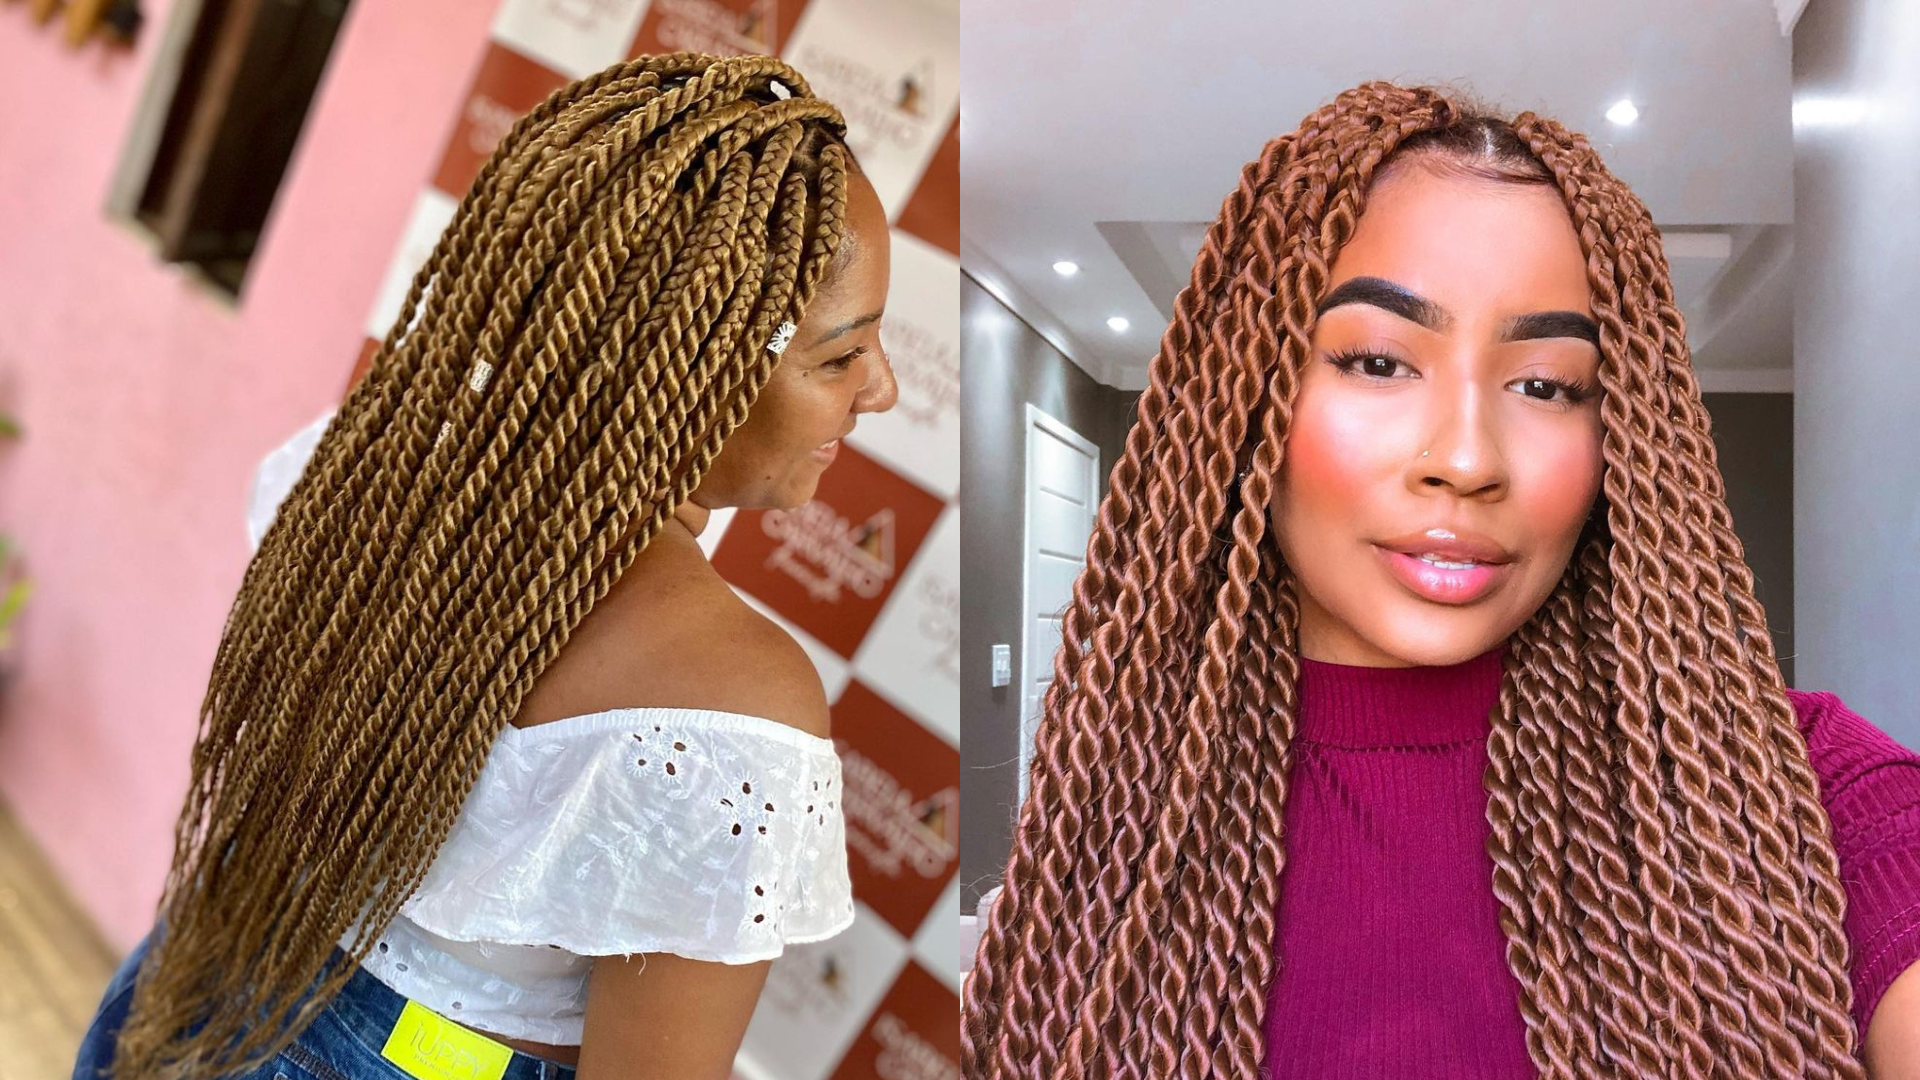 33 awesome short knotless braids with beads ideas to try out - Legit.ng